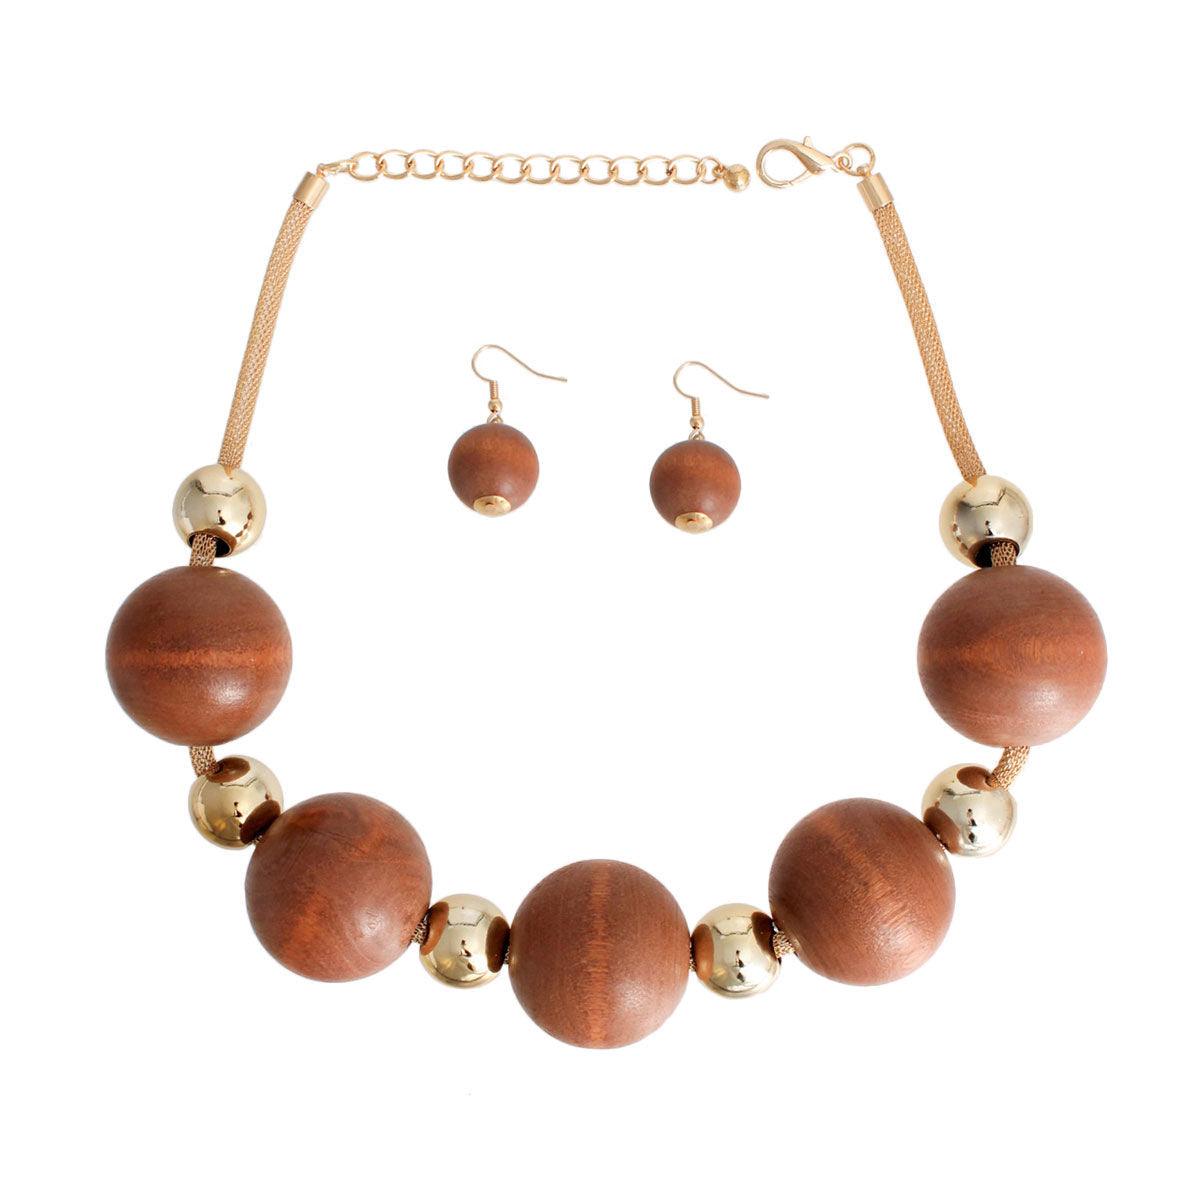 Nature's Best: Unique Wood Bead Necklace & Earrings Set for You